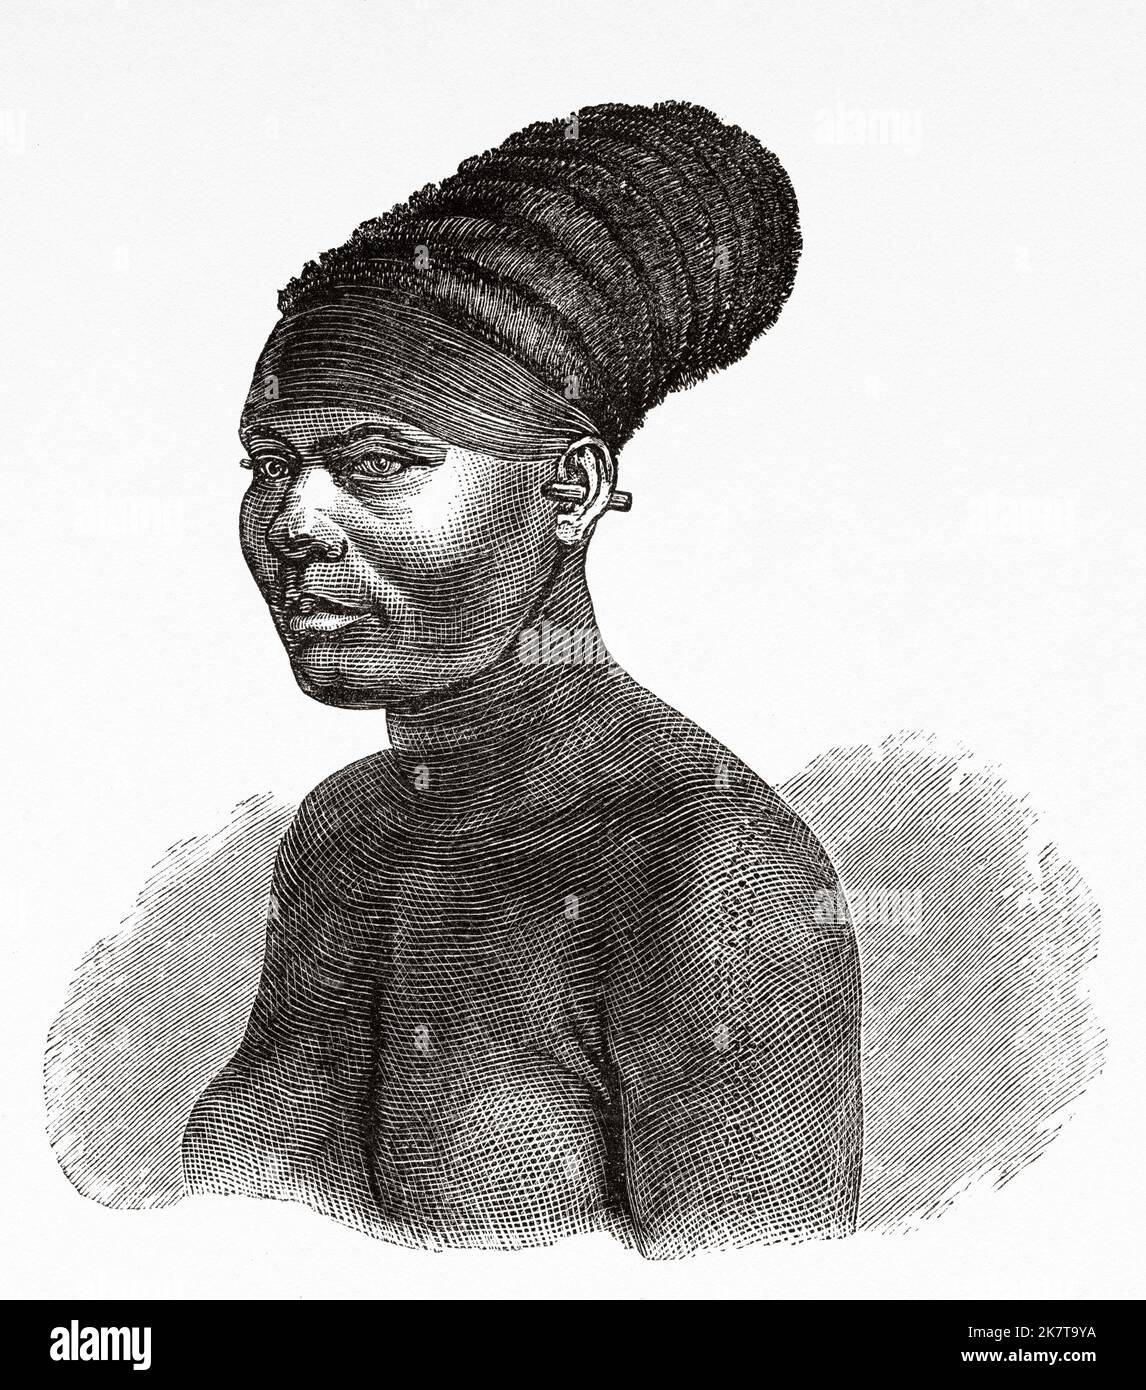 Mombuttu woman, Democratic Republic of the Congo. Africa. Heart of Africa Three years travels and adventures in the unexplored regions of Central Africa by Georg August Schweinfurth, 1868-1871 Stock Photo